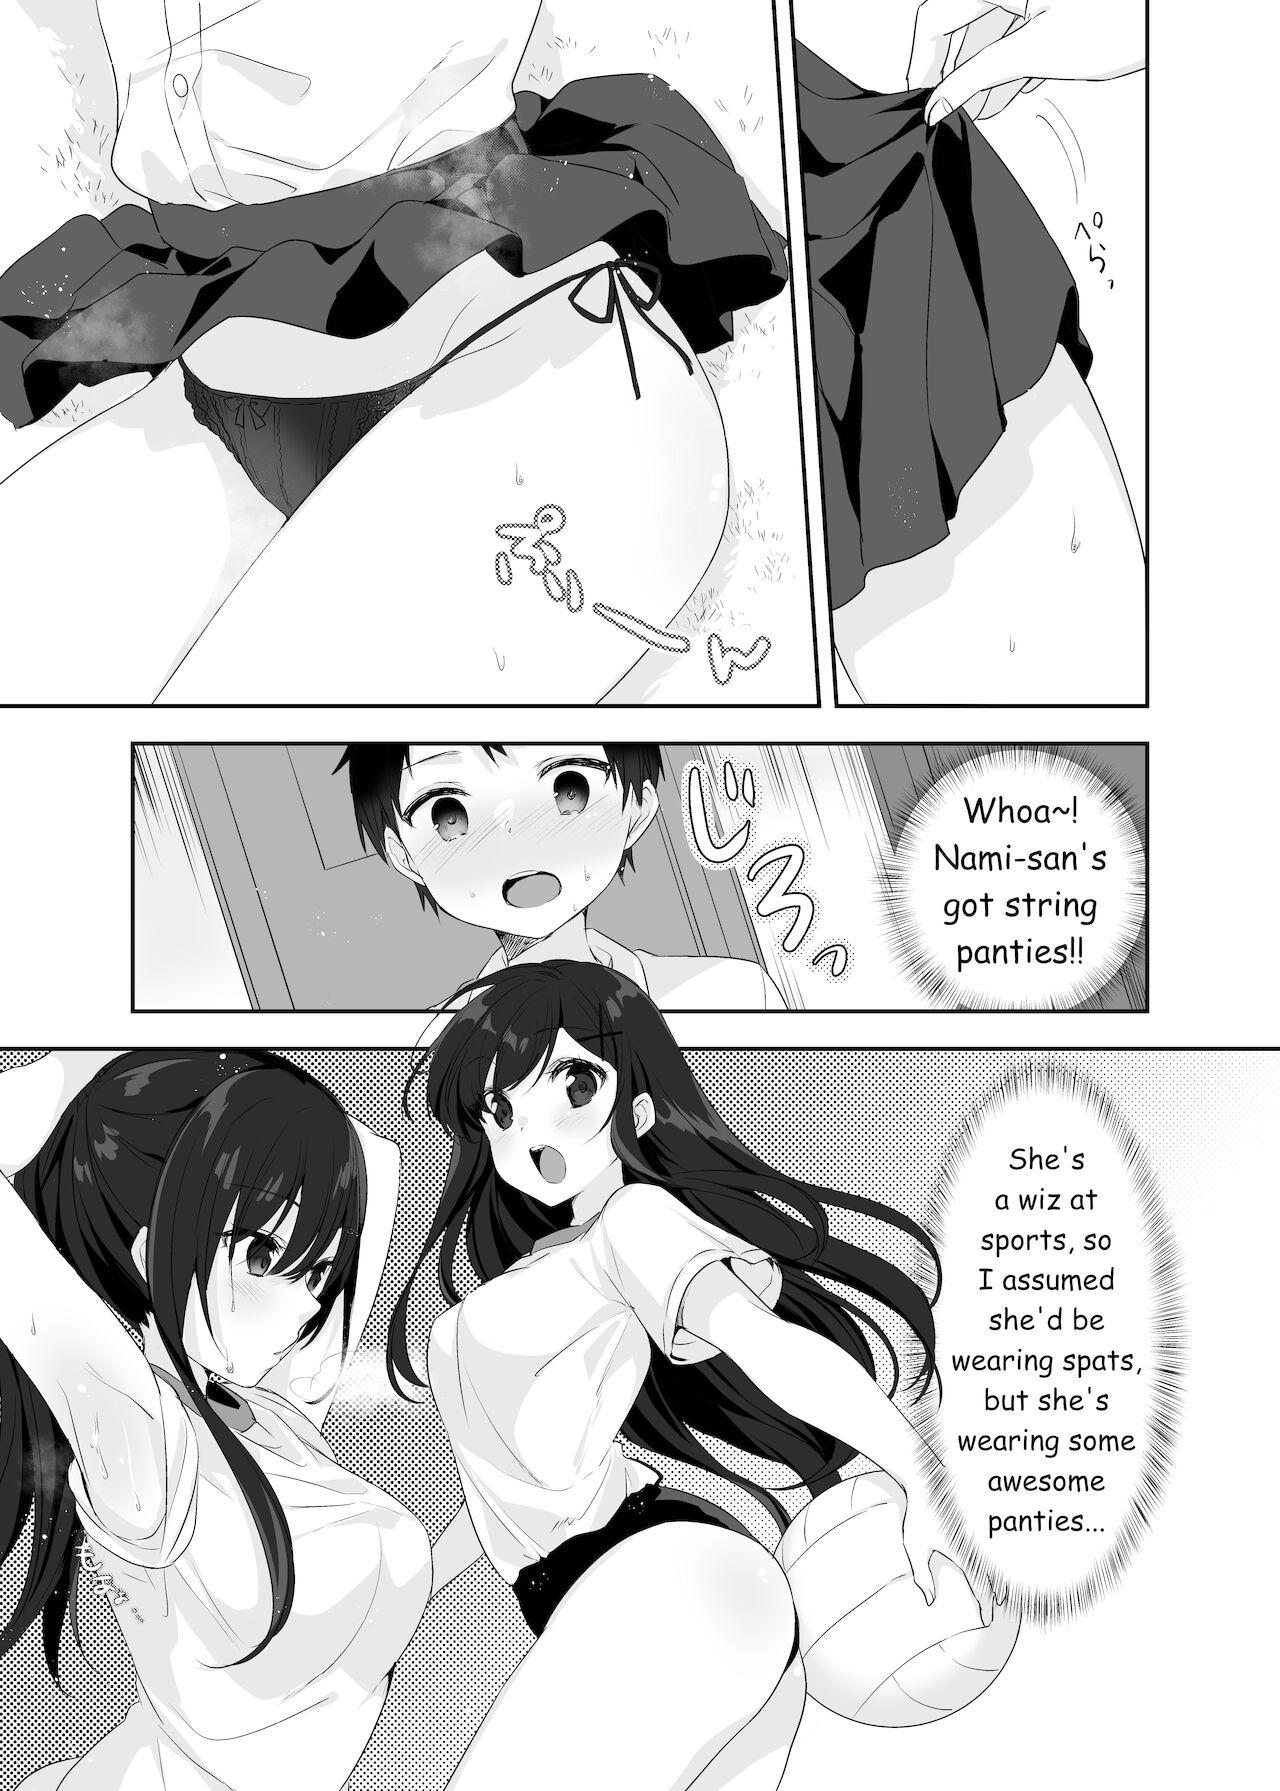 Speculum Boku no Onee-chan to Tomodachi wo Nemurasete Osottemitara Kaeriuchi ni Atta | The Tables were Turned when I tried to Rape my Sister and her Friends while they were Asleep Grandma - Page 5